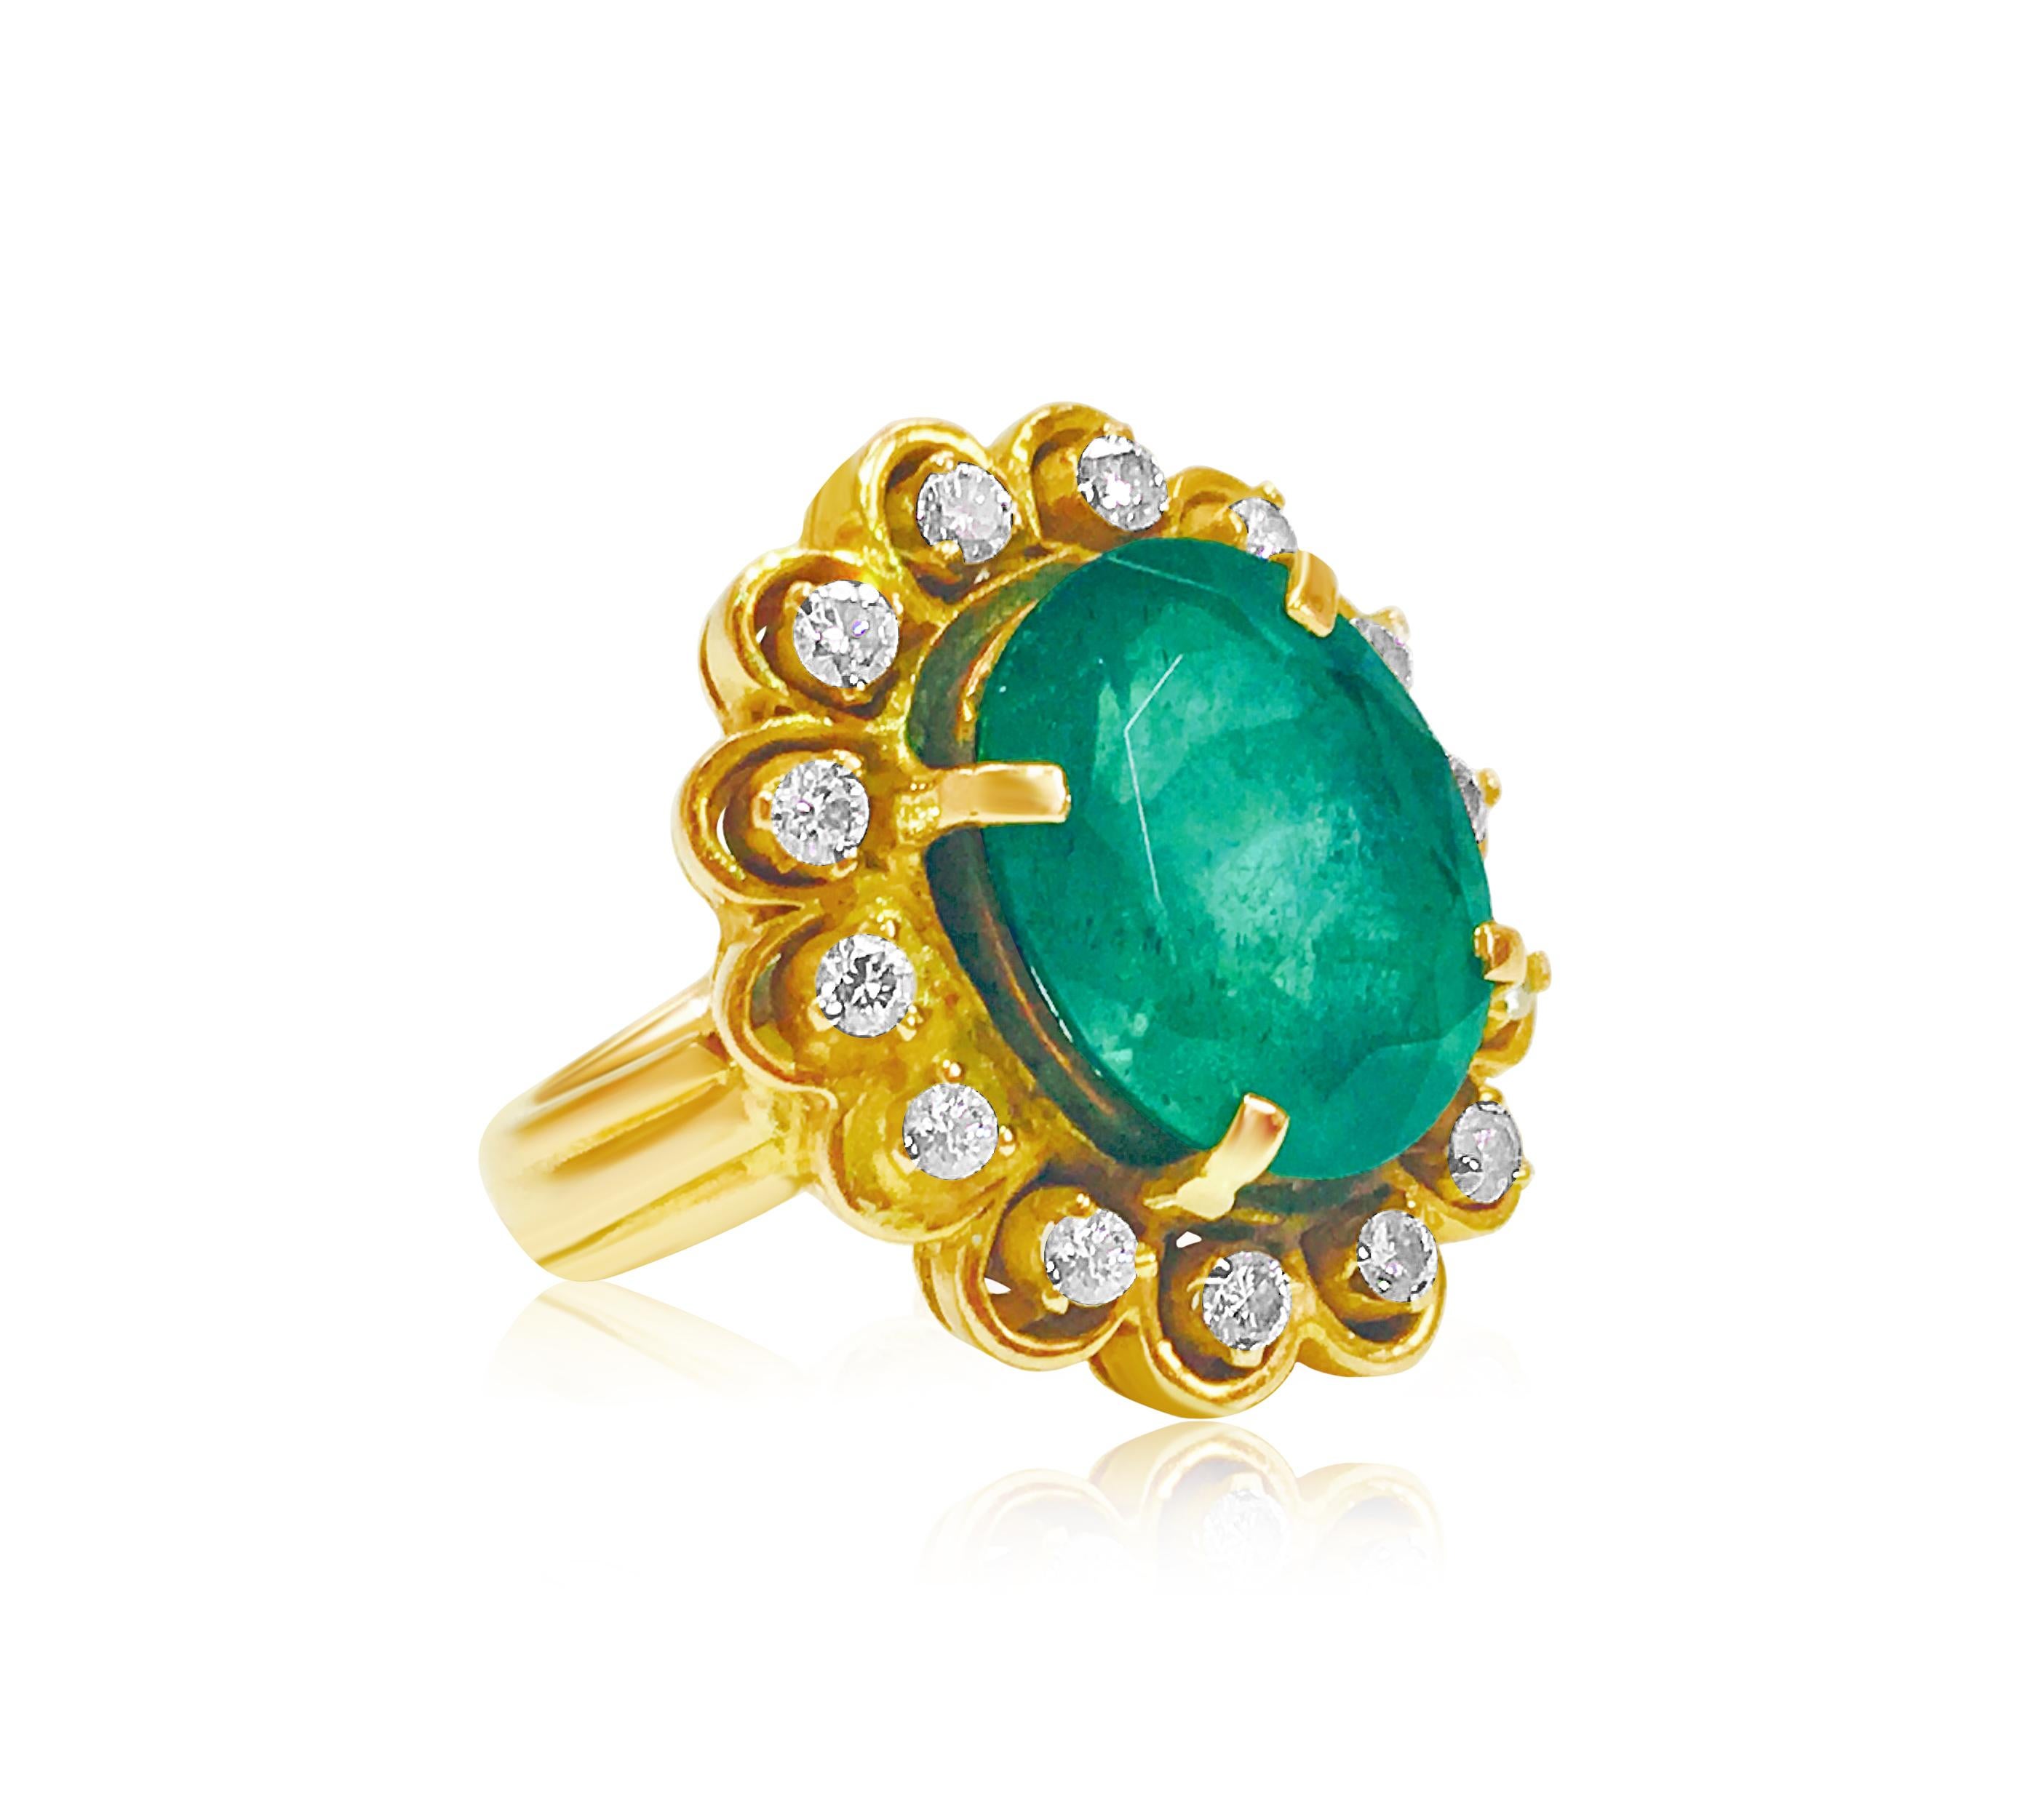 Indulge in luxurious elegance with this vintage ring, expertly crafted from 18K yellow gold. At its center gleams a magnificent 5.50-carat oval-cut natural emerald, held securely in place by delicate prongs. Encircling the emerald are dazzling